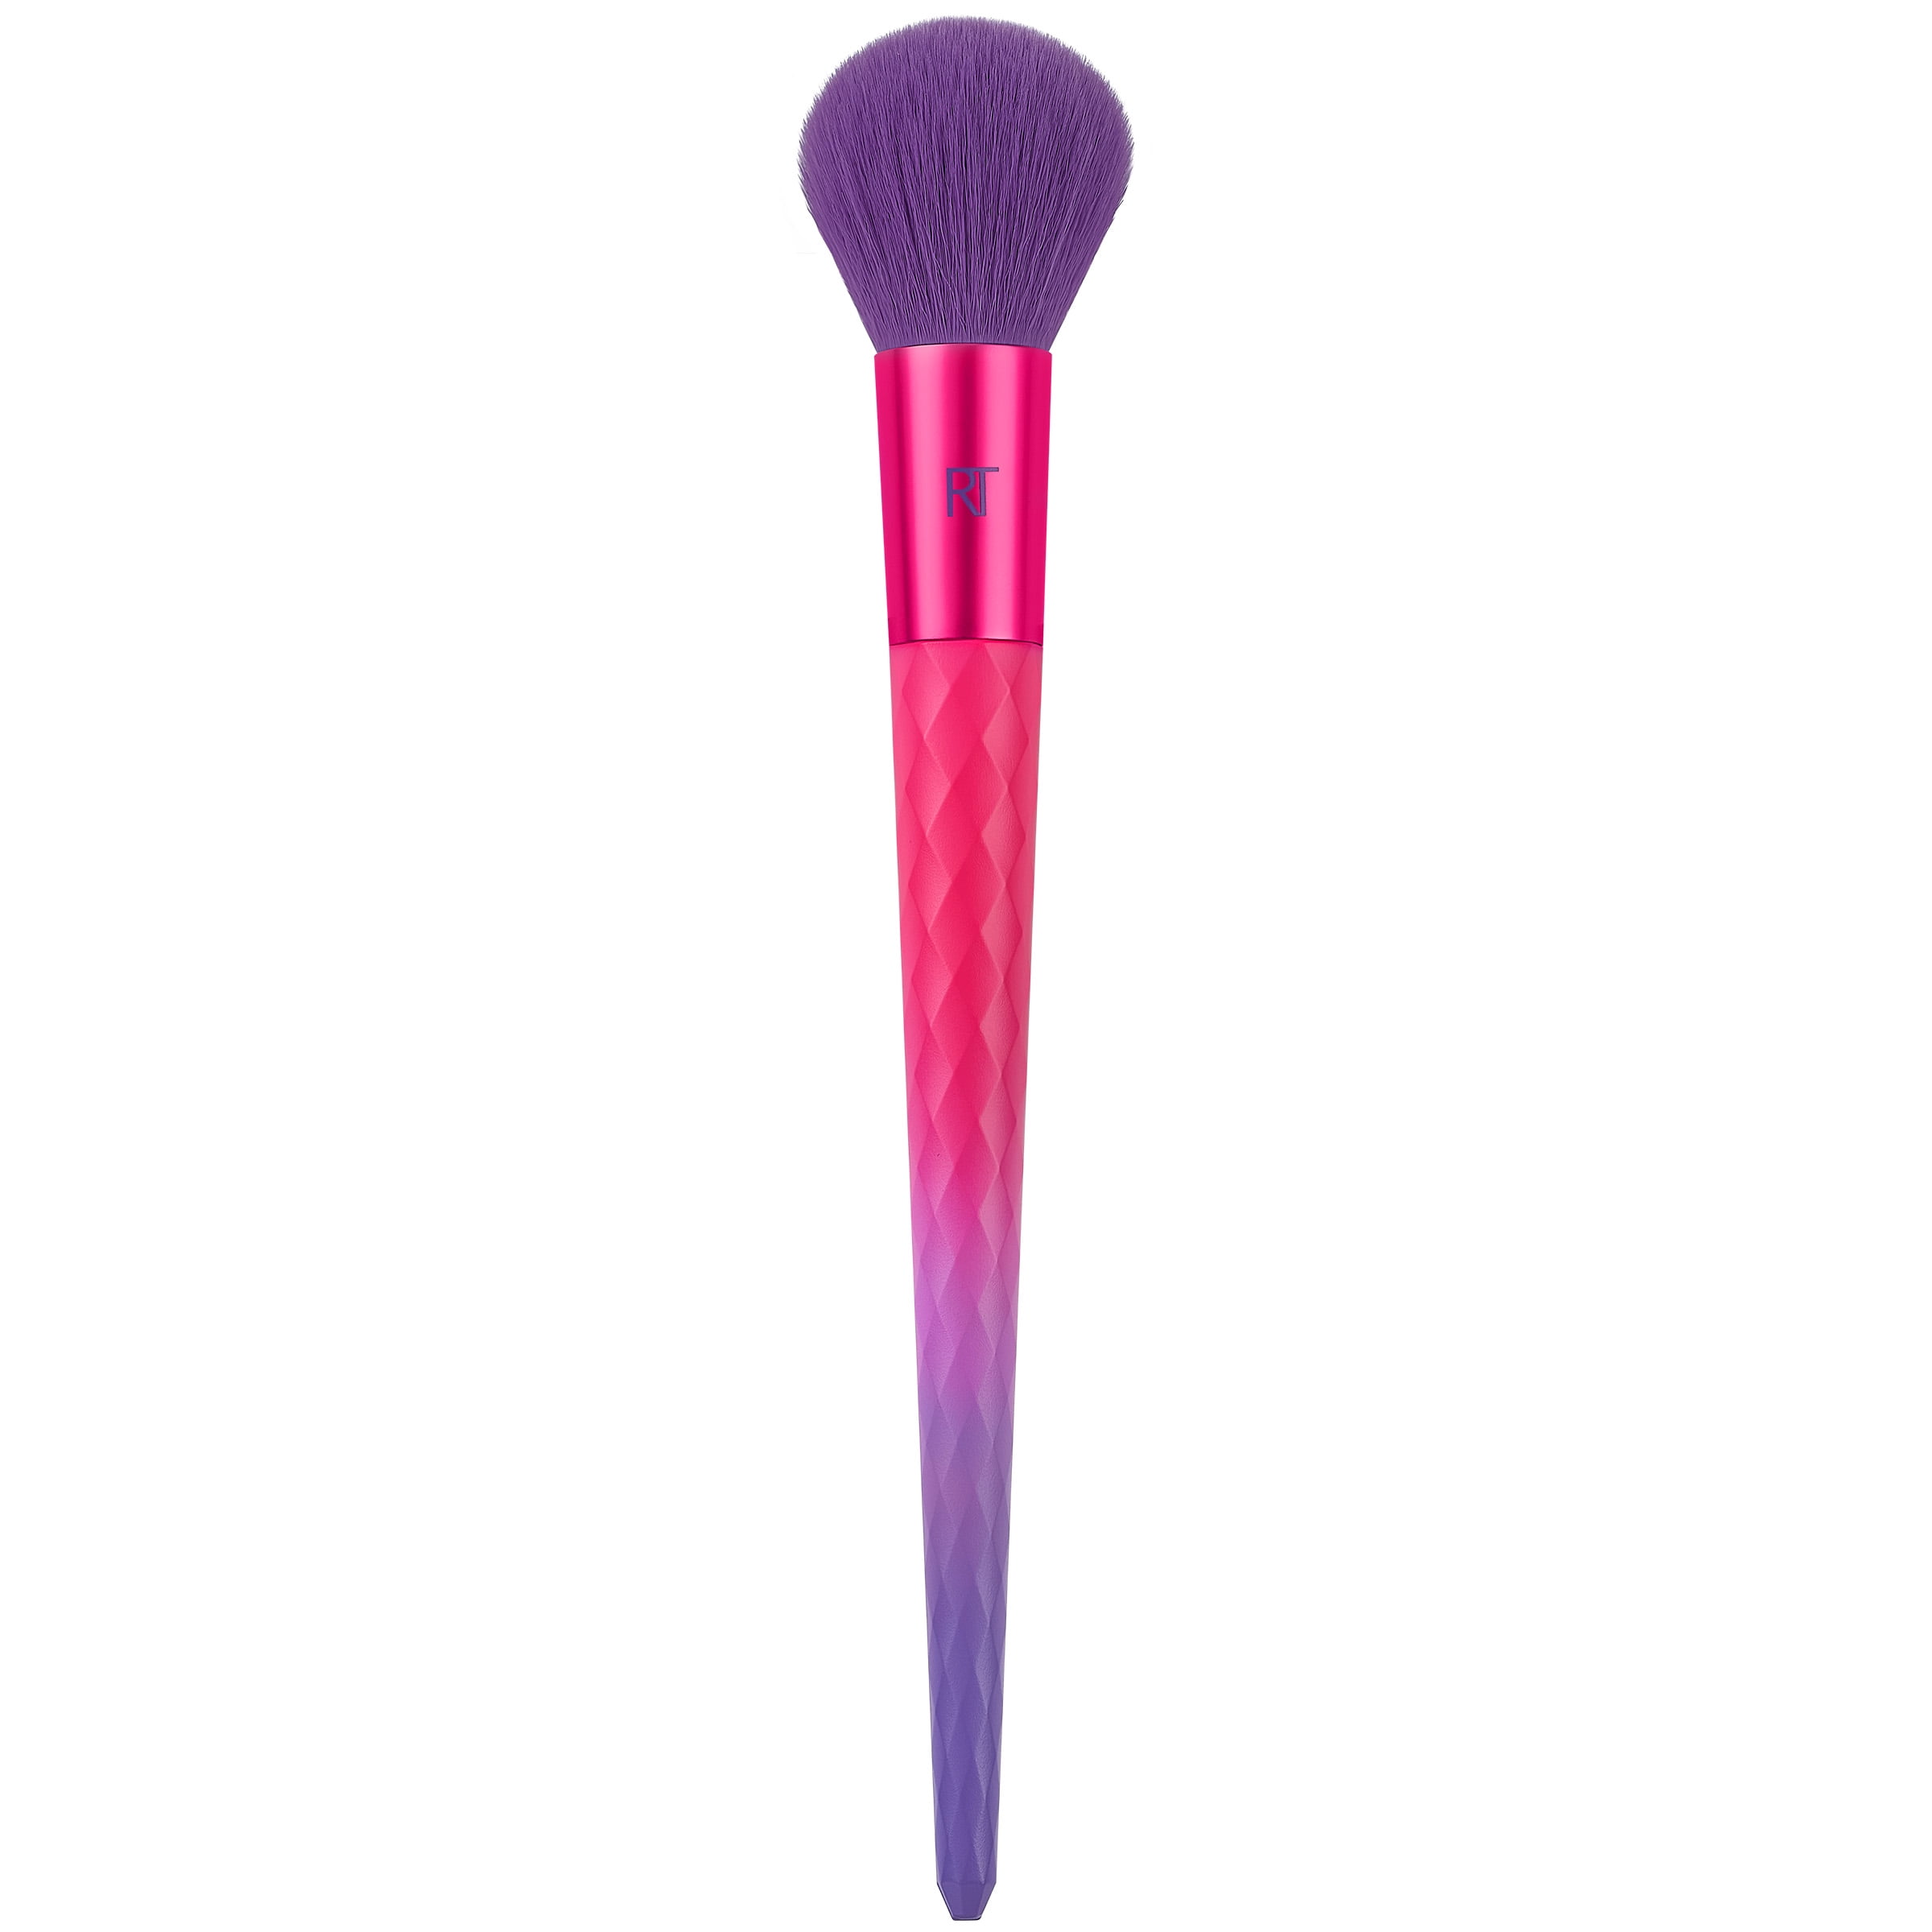 Real Techniques Galactic Glo Hue Blush Makeup Brush,1 Count